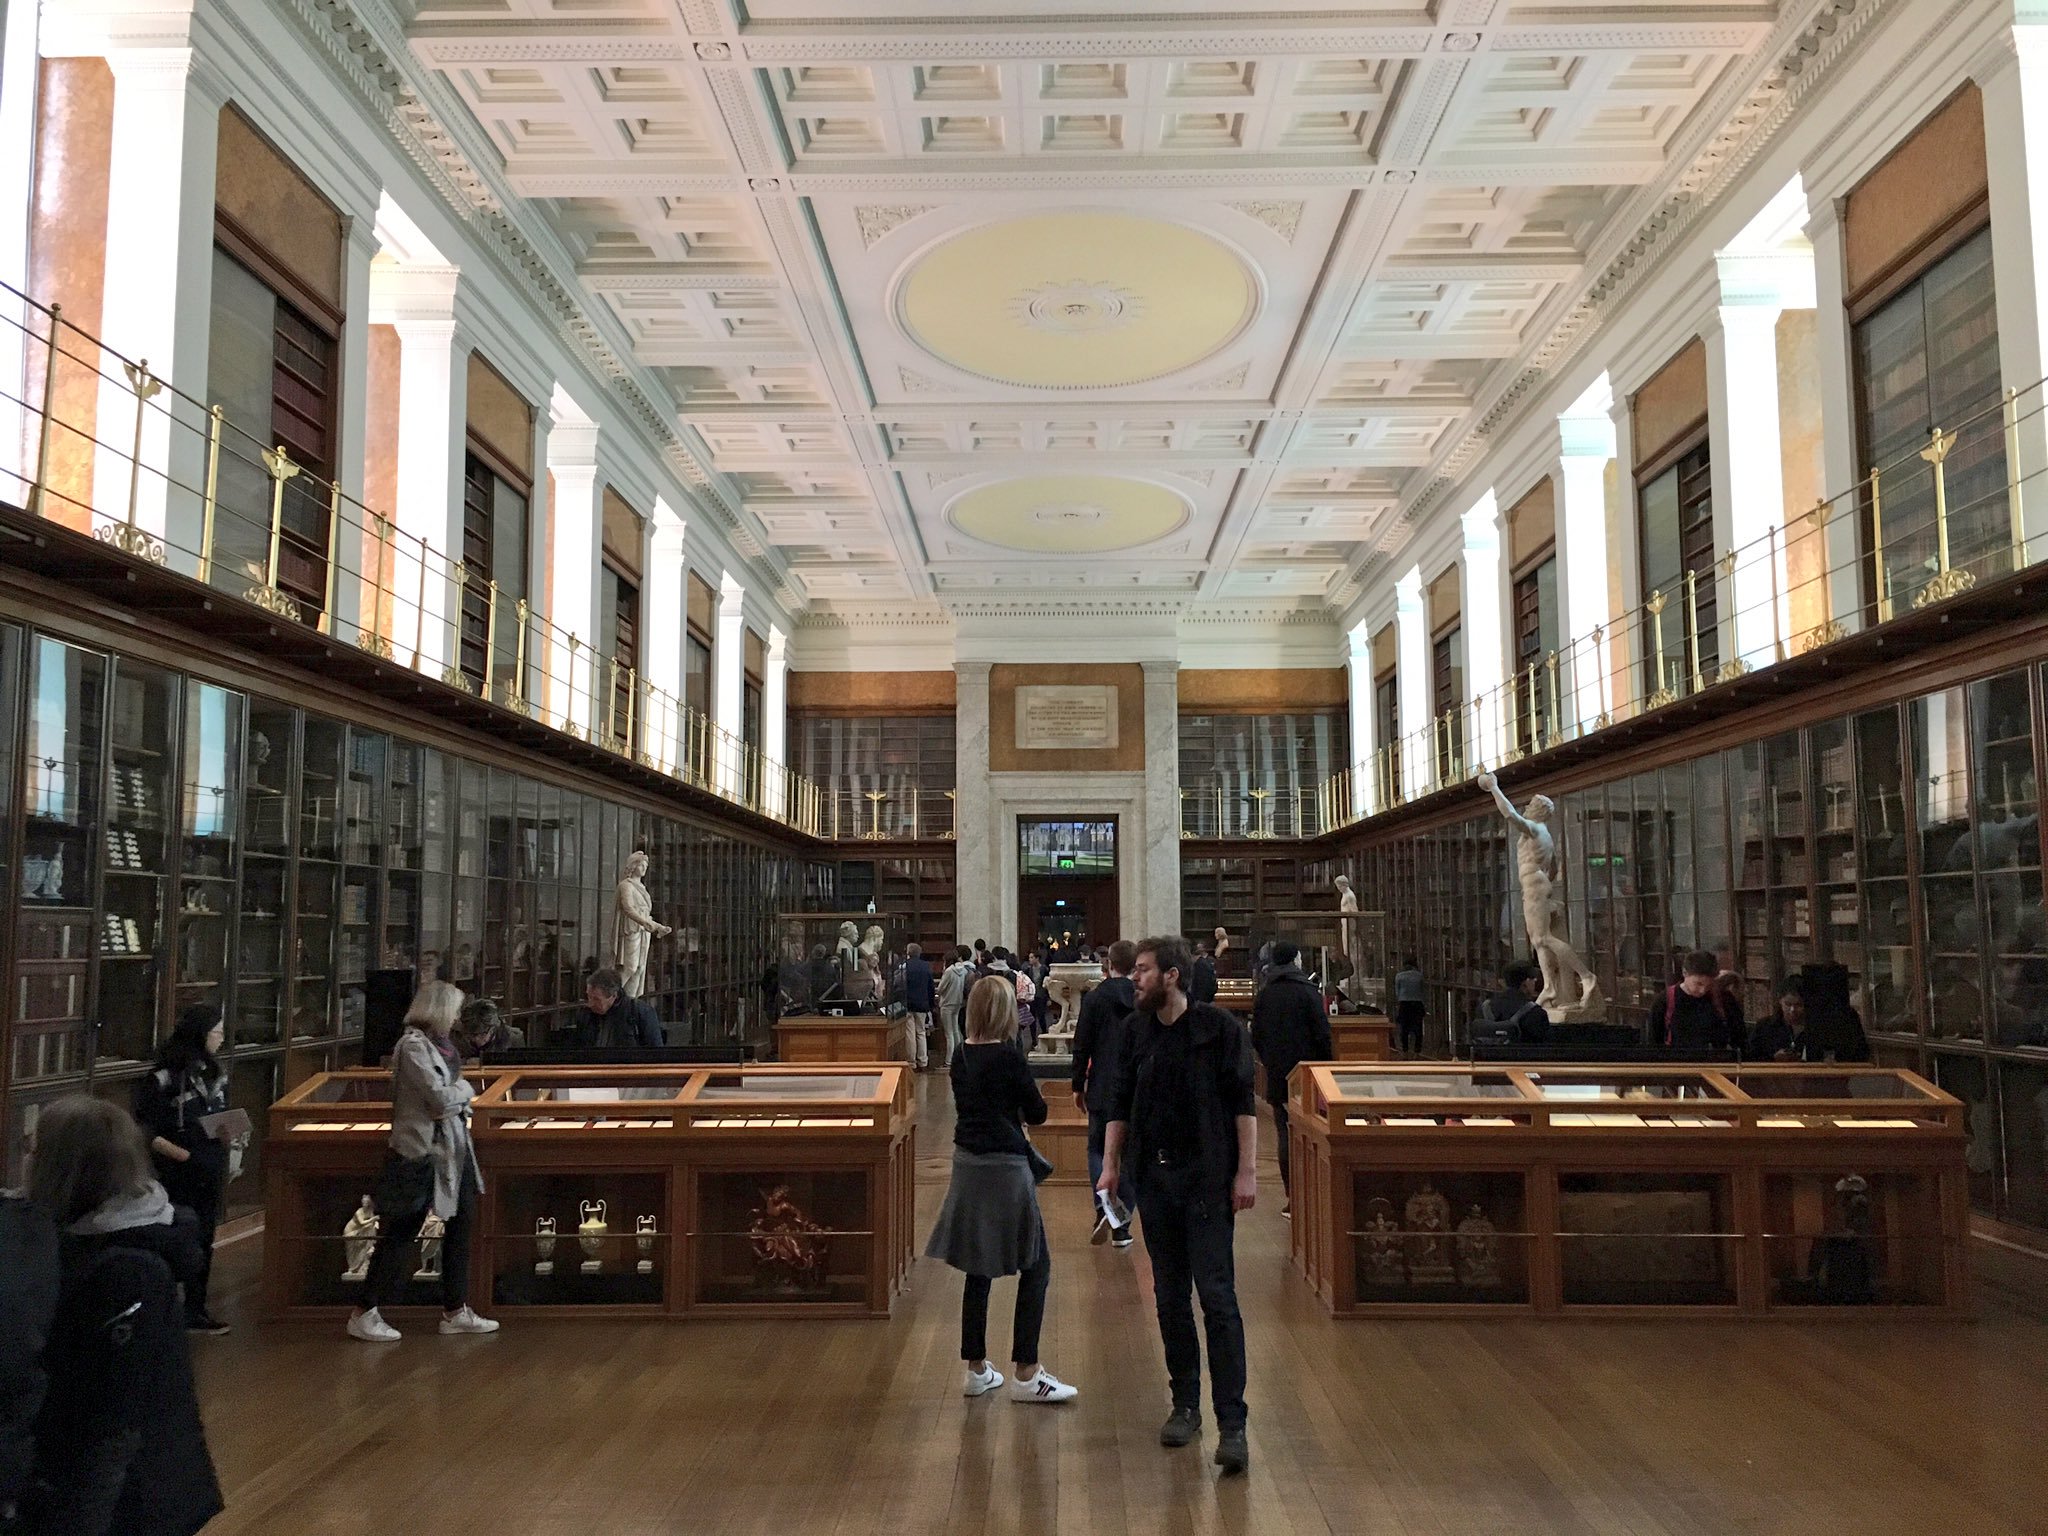 Full morning of the British Museum. It is extraordinary, nearly cried in the Enlightenment room. https://t.co/QaYLNxYFeC